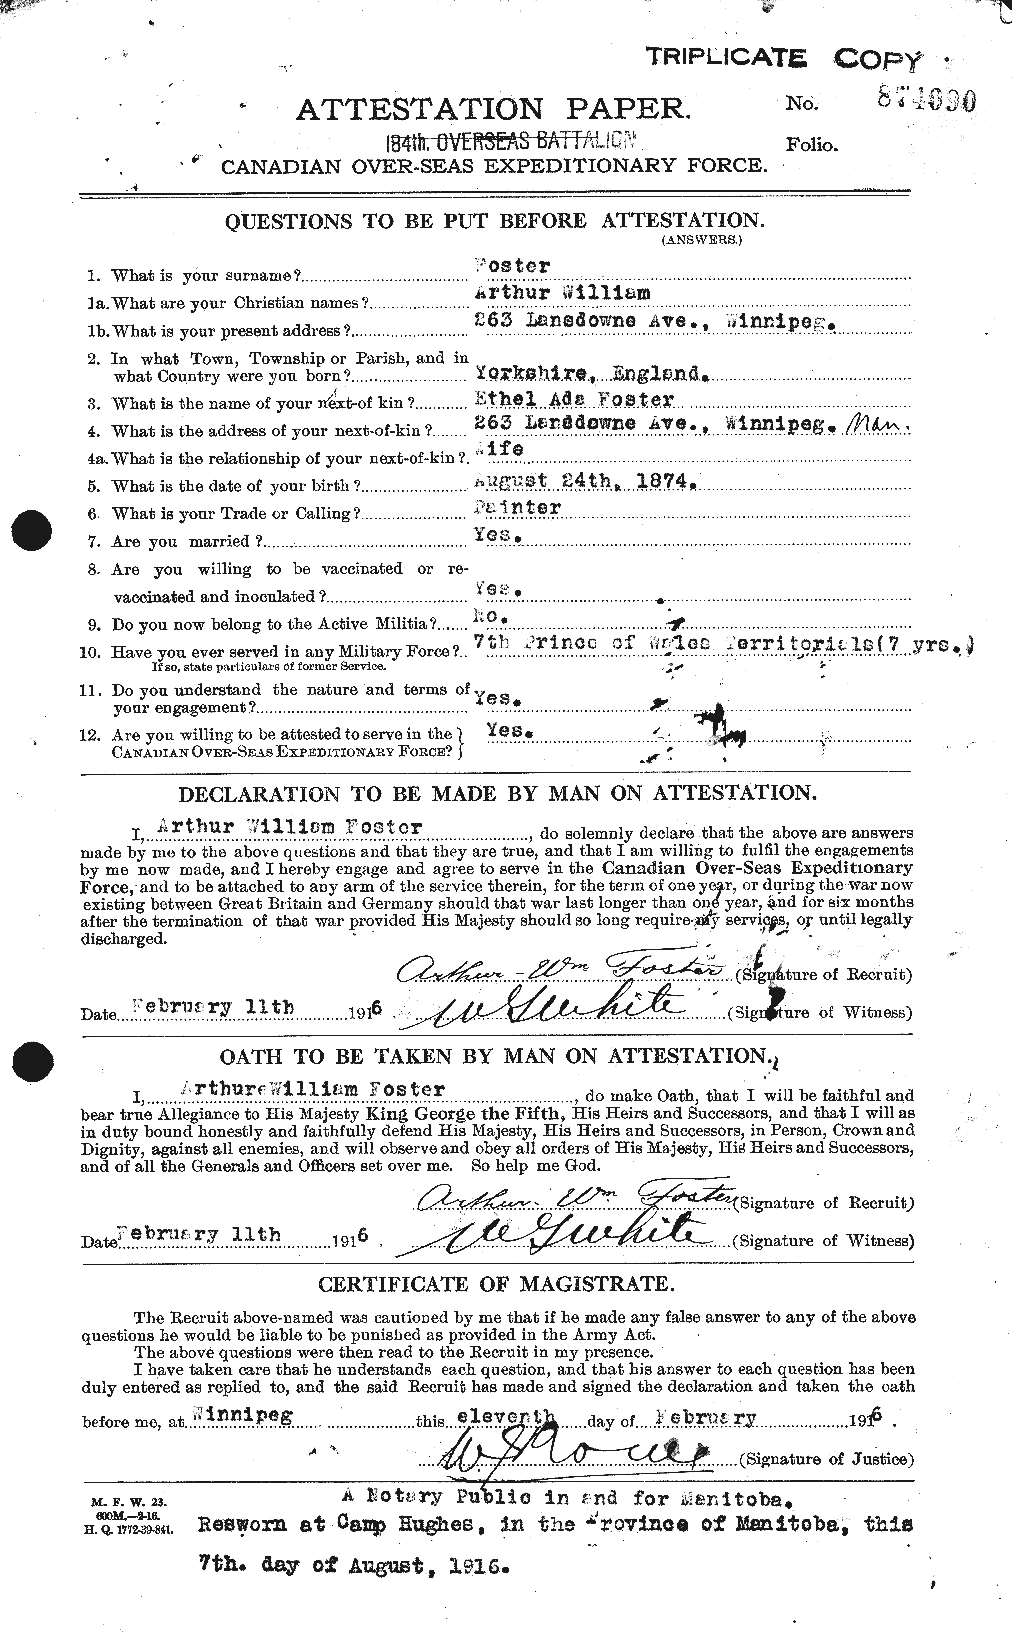 Personnel Records of the First World War - CEF 330480a